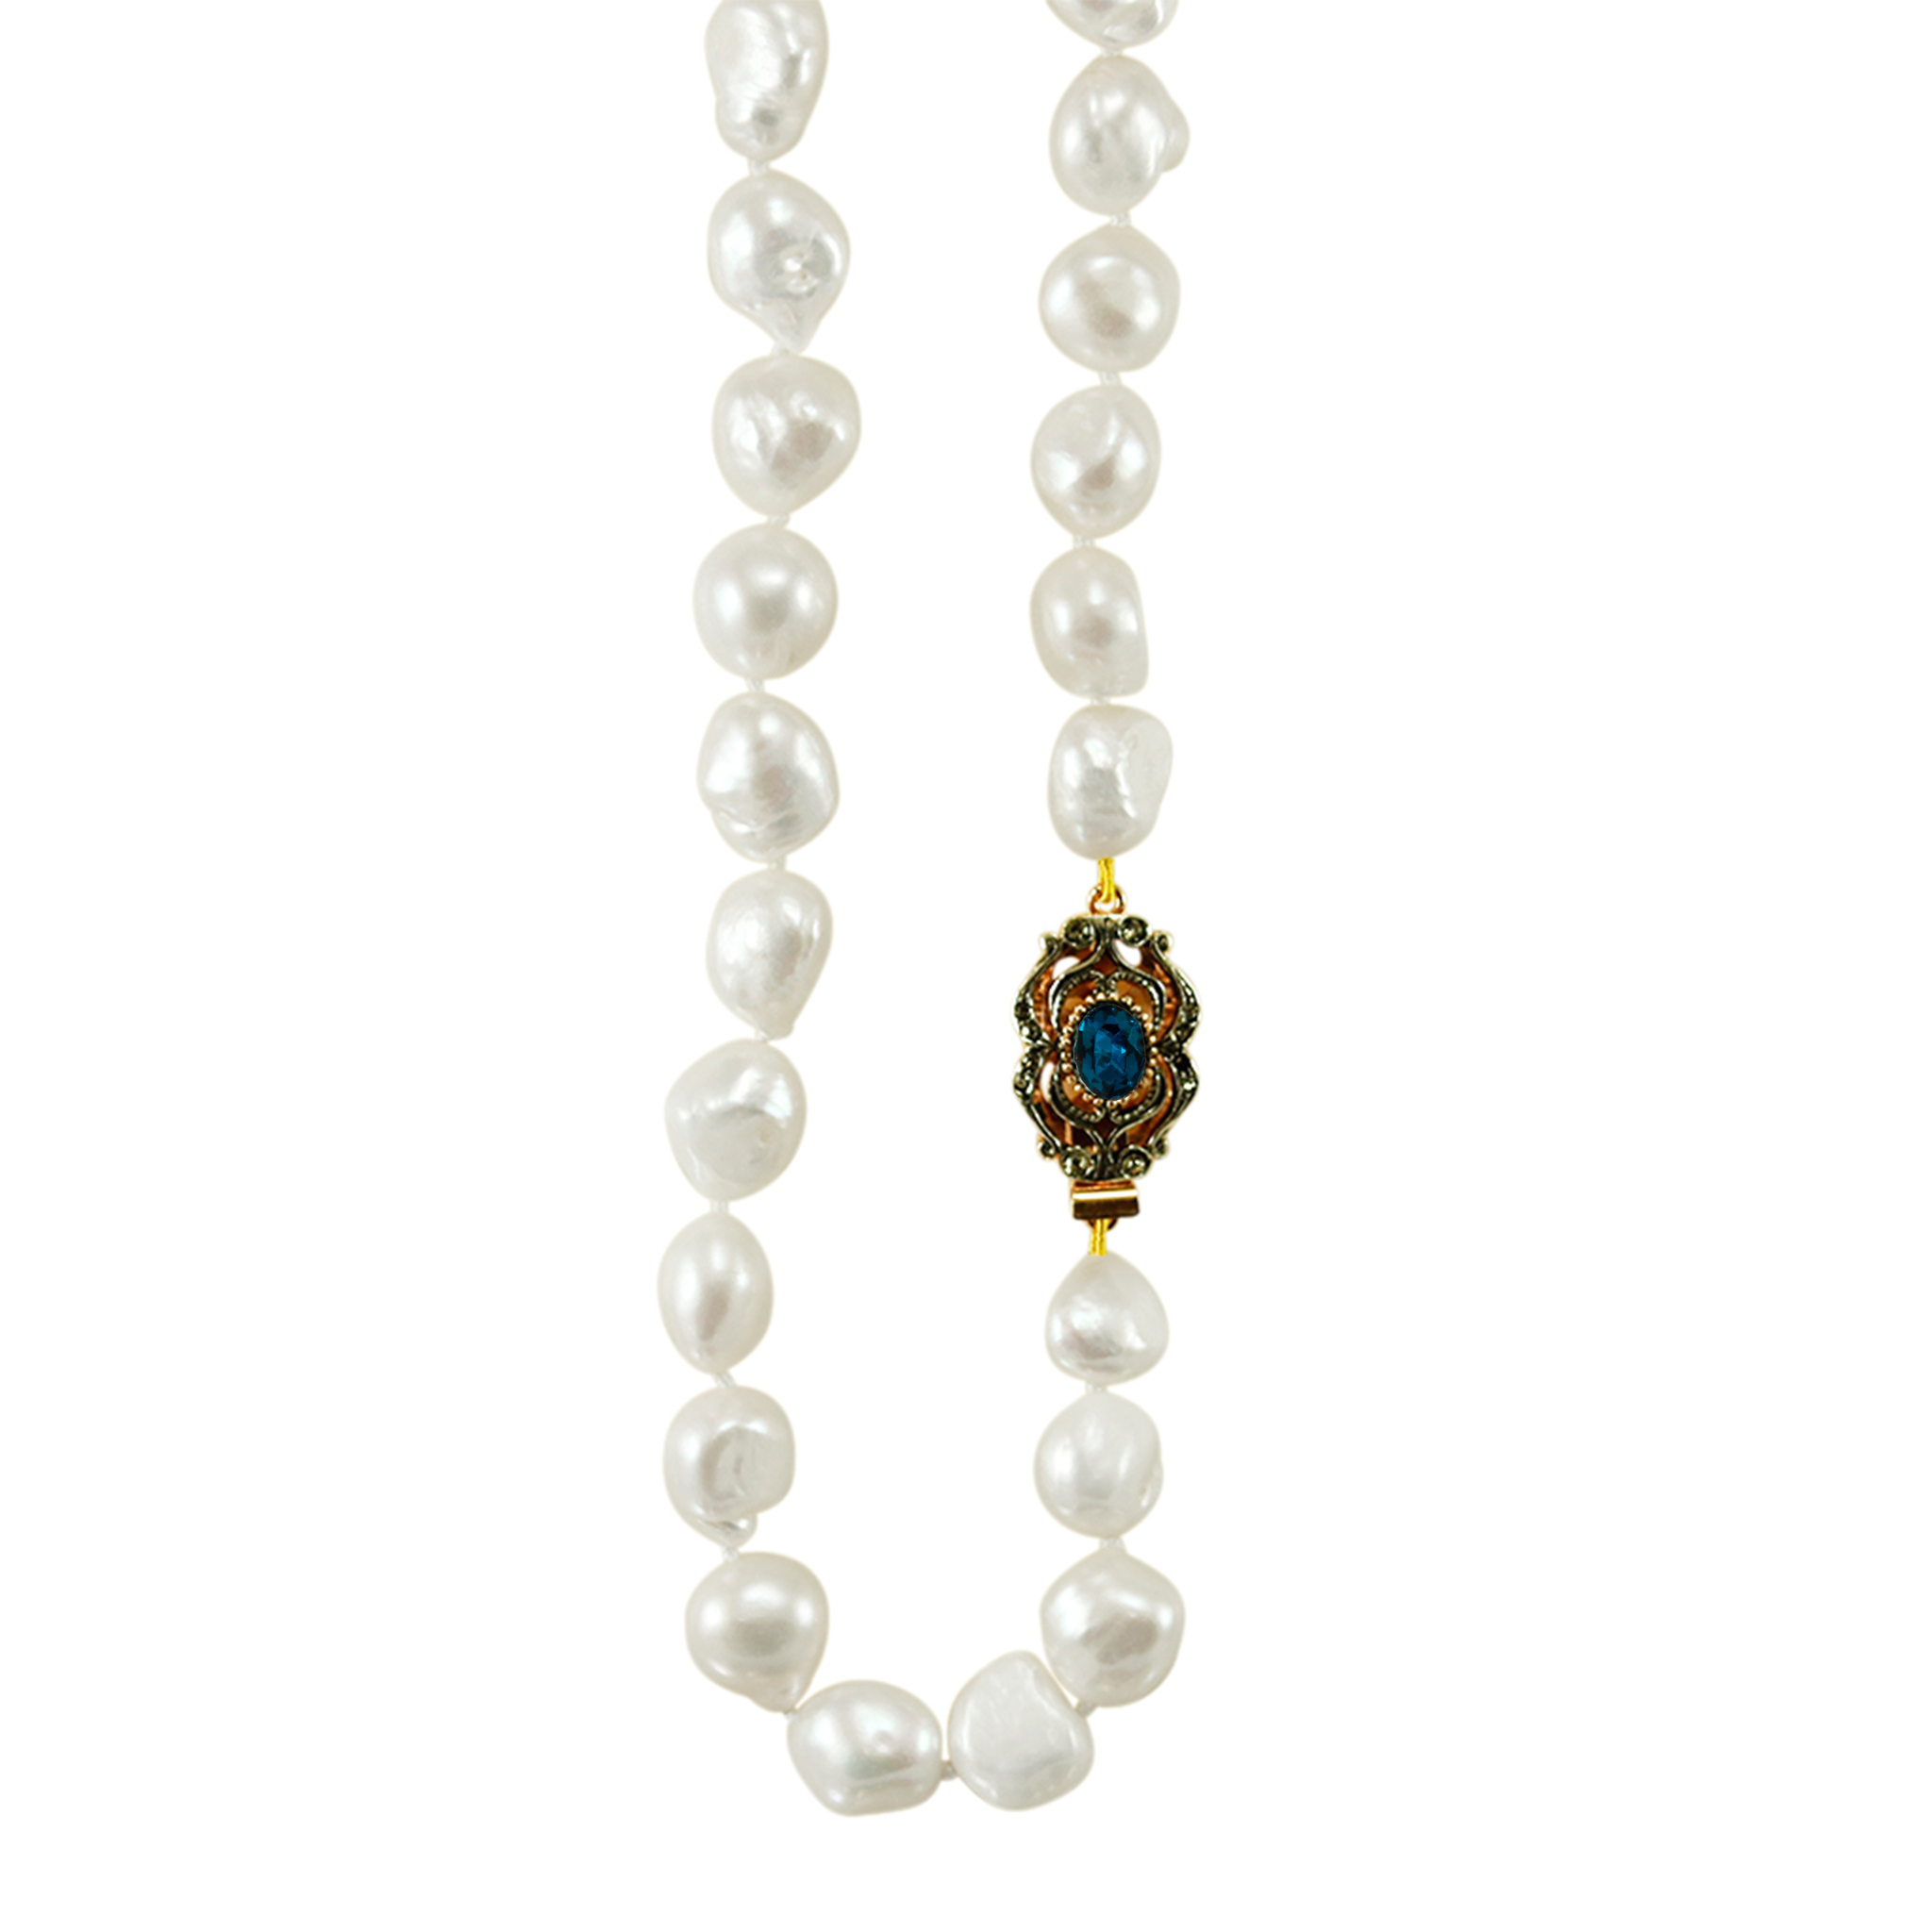 Baroque White Pearl Necklace with Blue Crystal Clasp